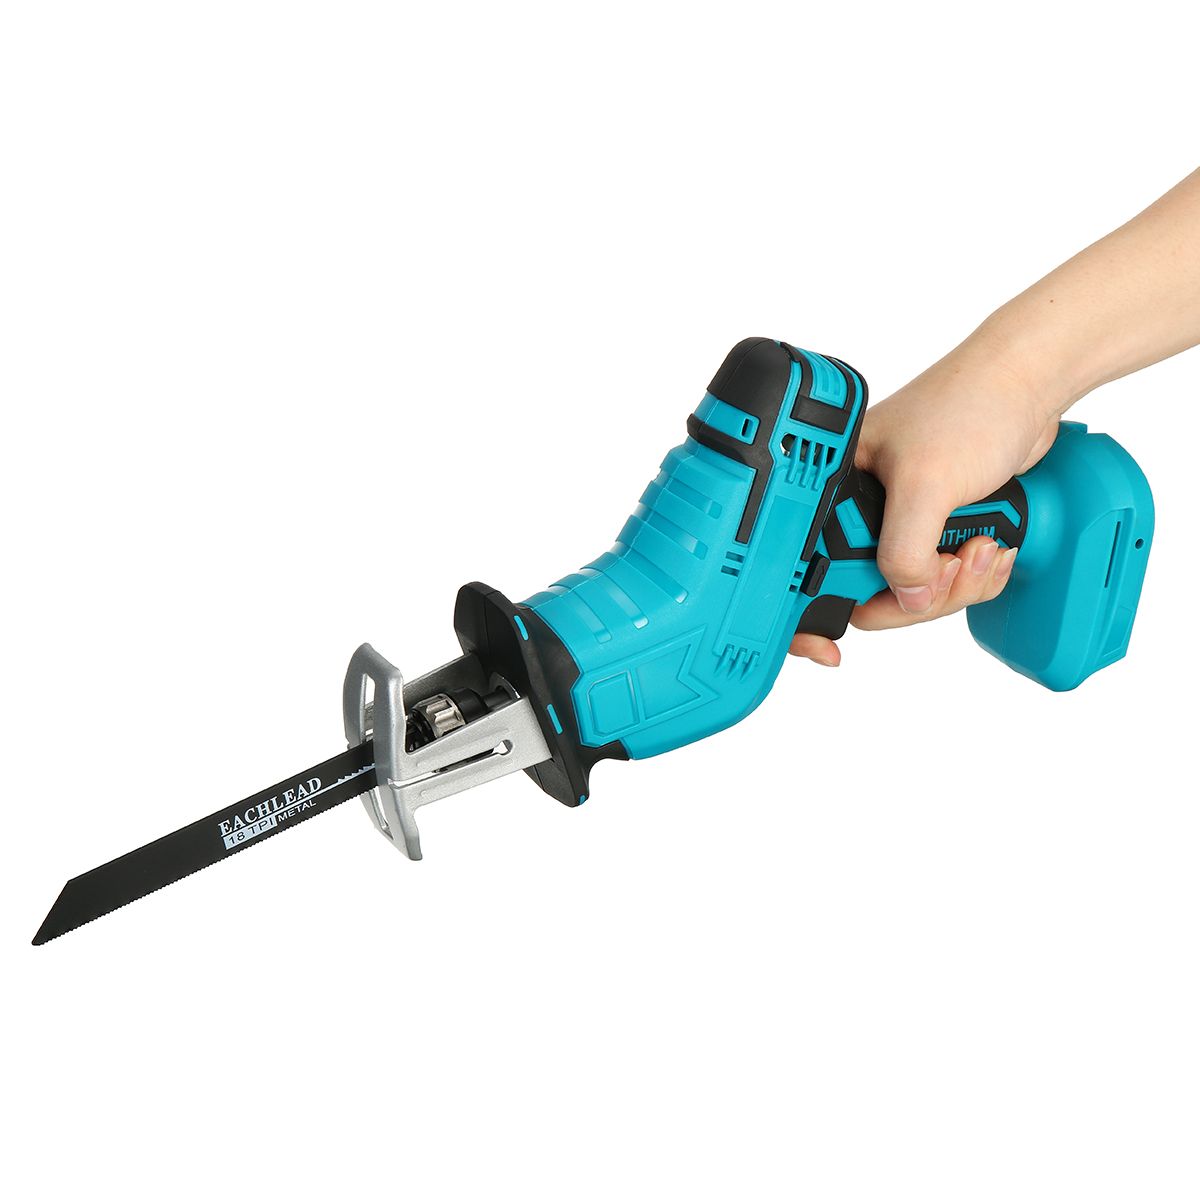 18V-Cordless-Handheld-Electric-Reciprocating-Saw-0-3000rpmmin-Electric-Saber-Saw-With-4-Pcs-Saw-Blad-1687353